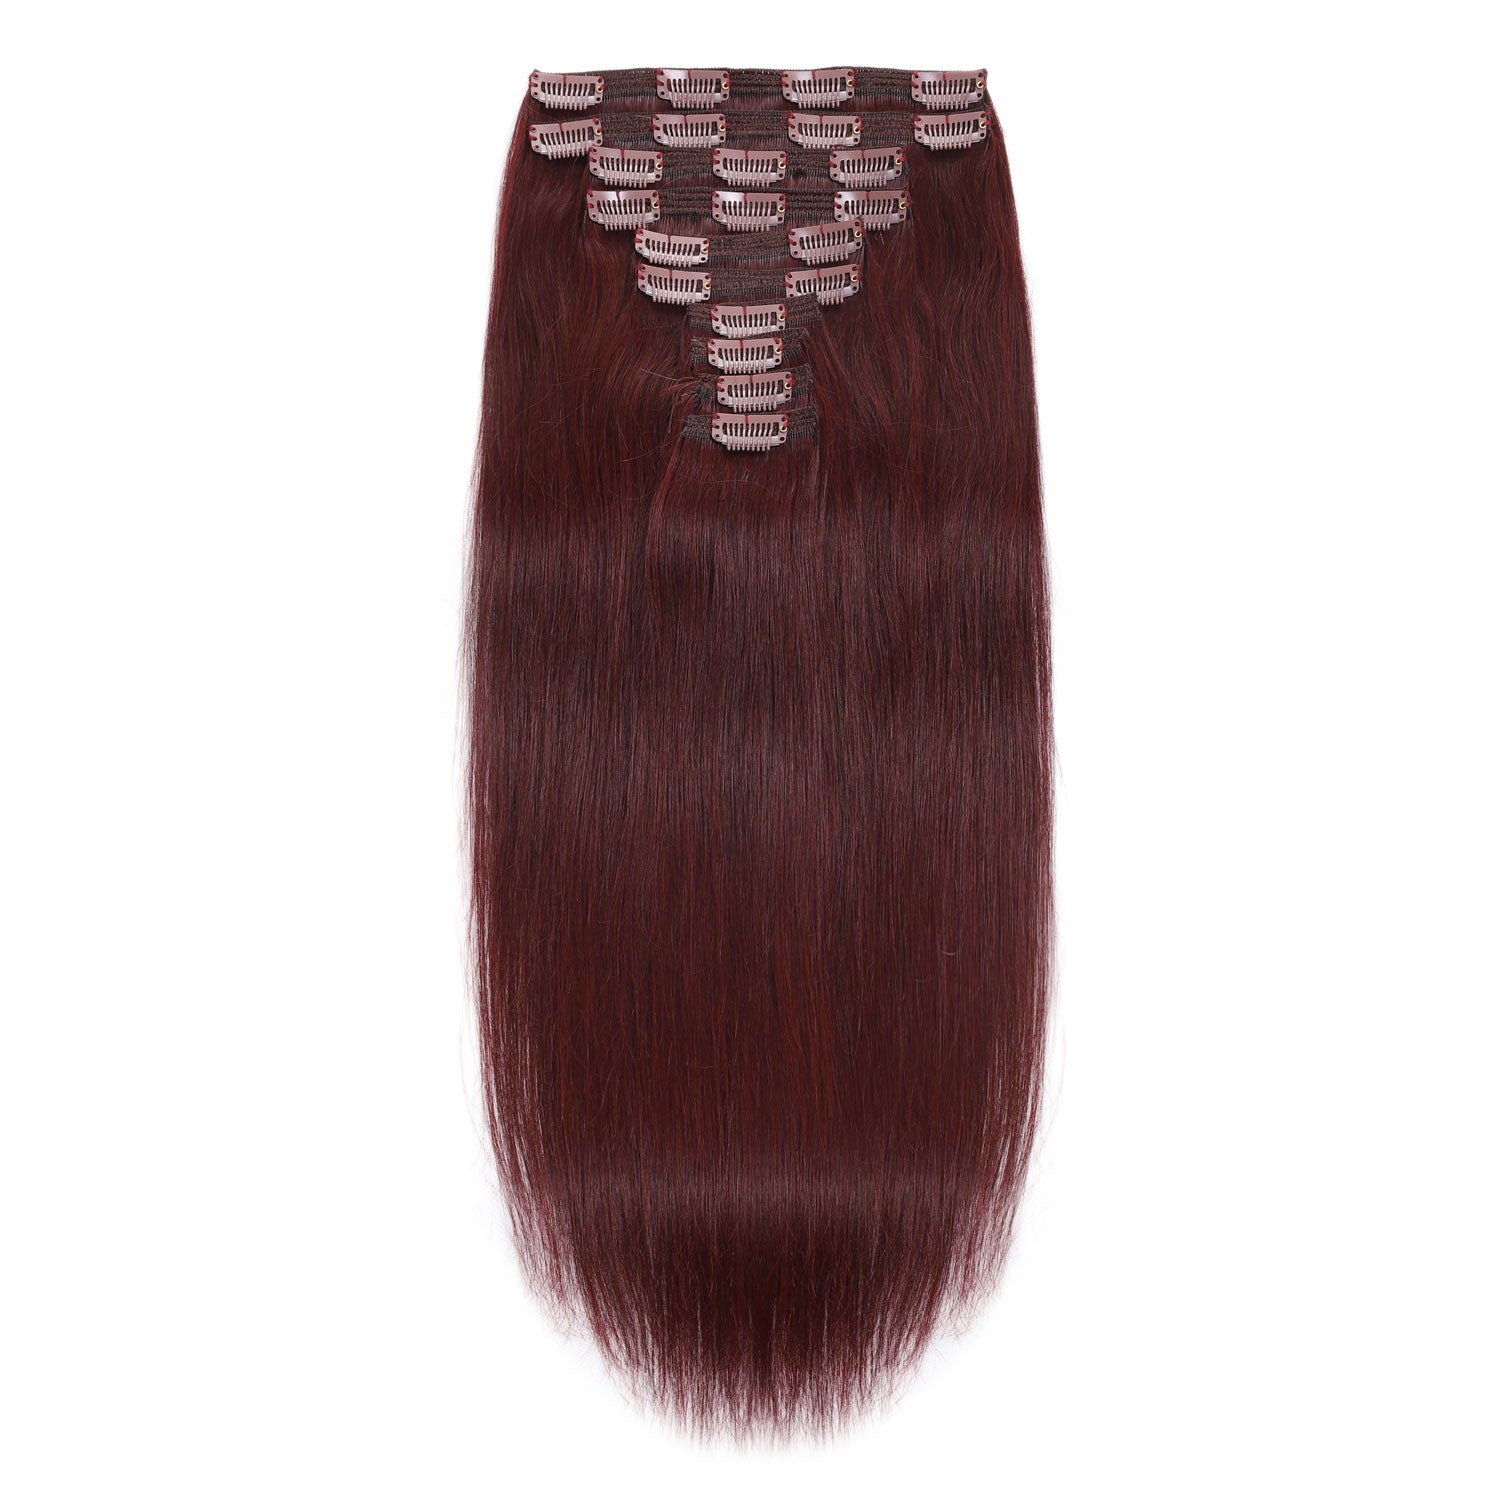 Human remy hair in inch extensions, offering fuller and thicker hair. These high-quality extensions provide a luxurious feel and natural look, enhancing your hairstyle with impressive length.